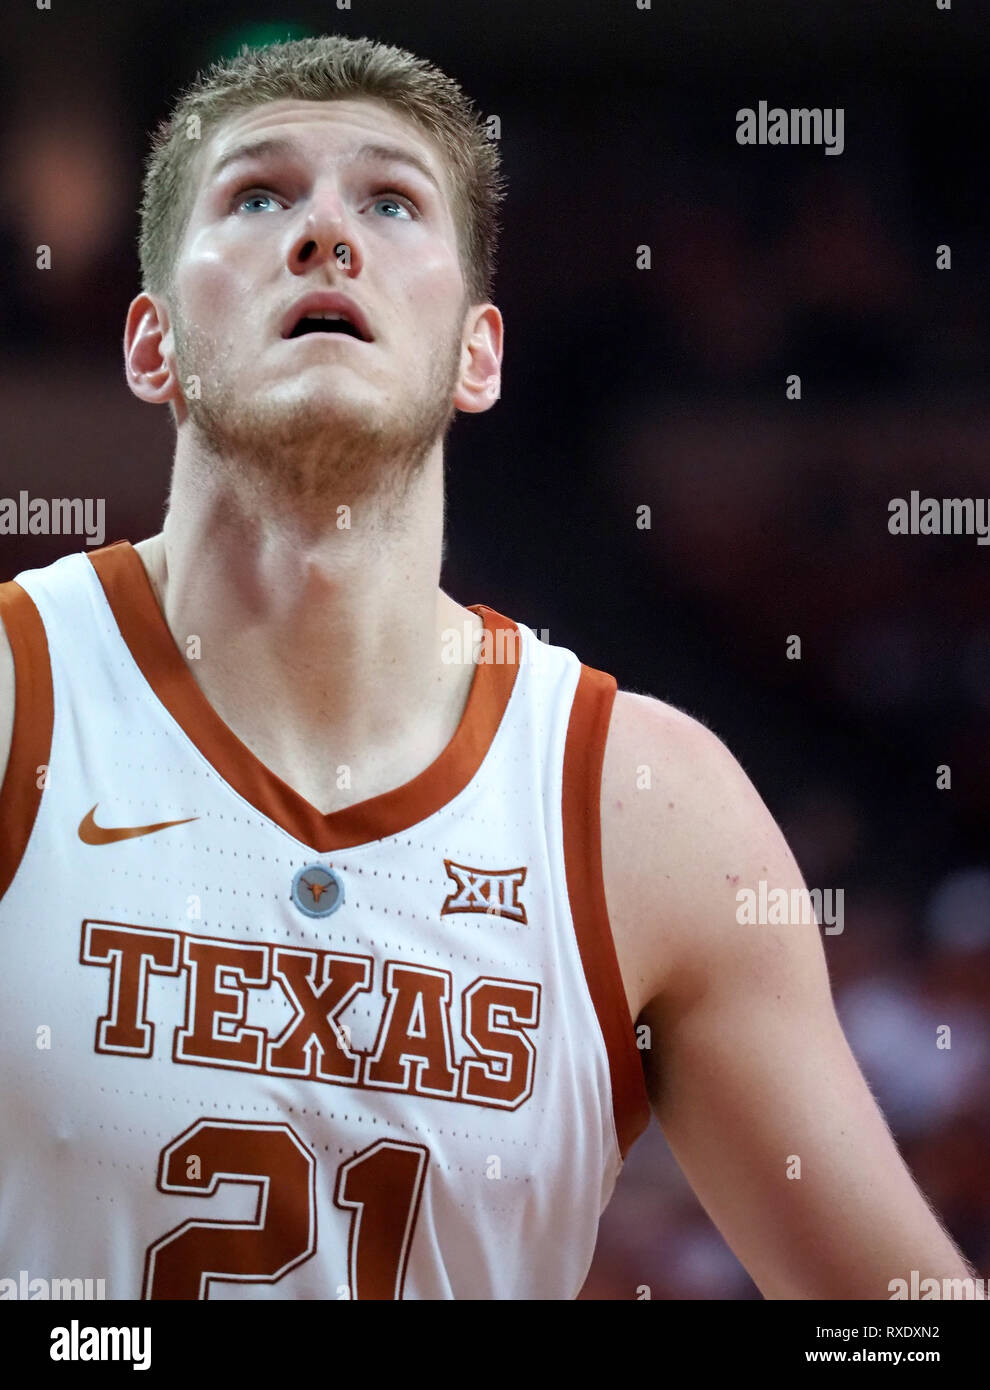 March 9, 2019. Dylan Osetkowski #21 of the Texas Longhorns in action vs the TCU Horned Frogs at the Frank Erwin Center in Austin Texas. TCU beats Texas 69-54.Robert Backman/Cal Sport Media. Stock Photo